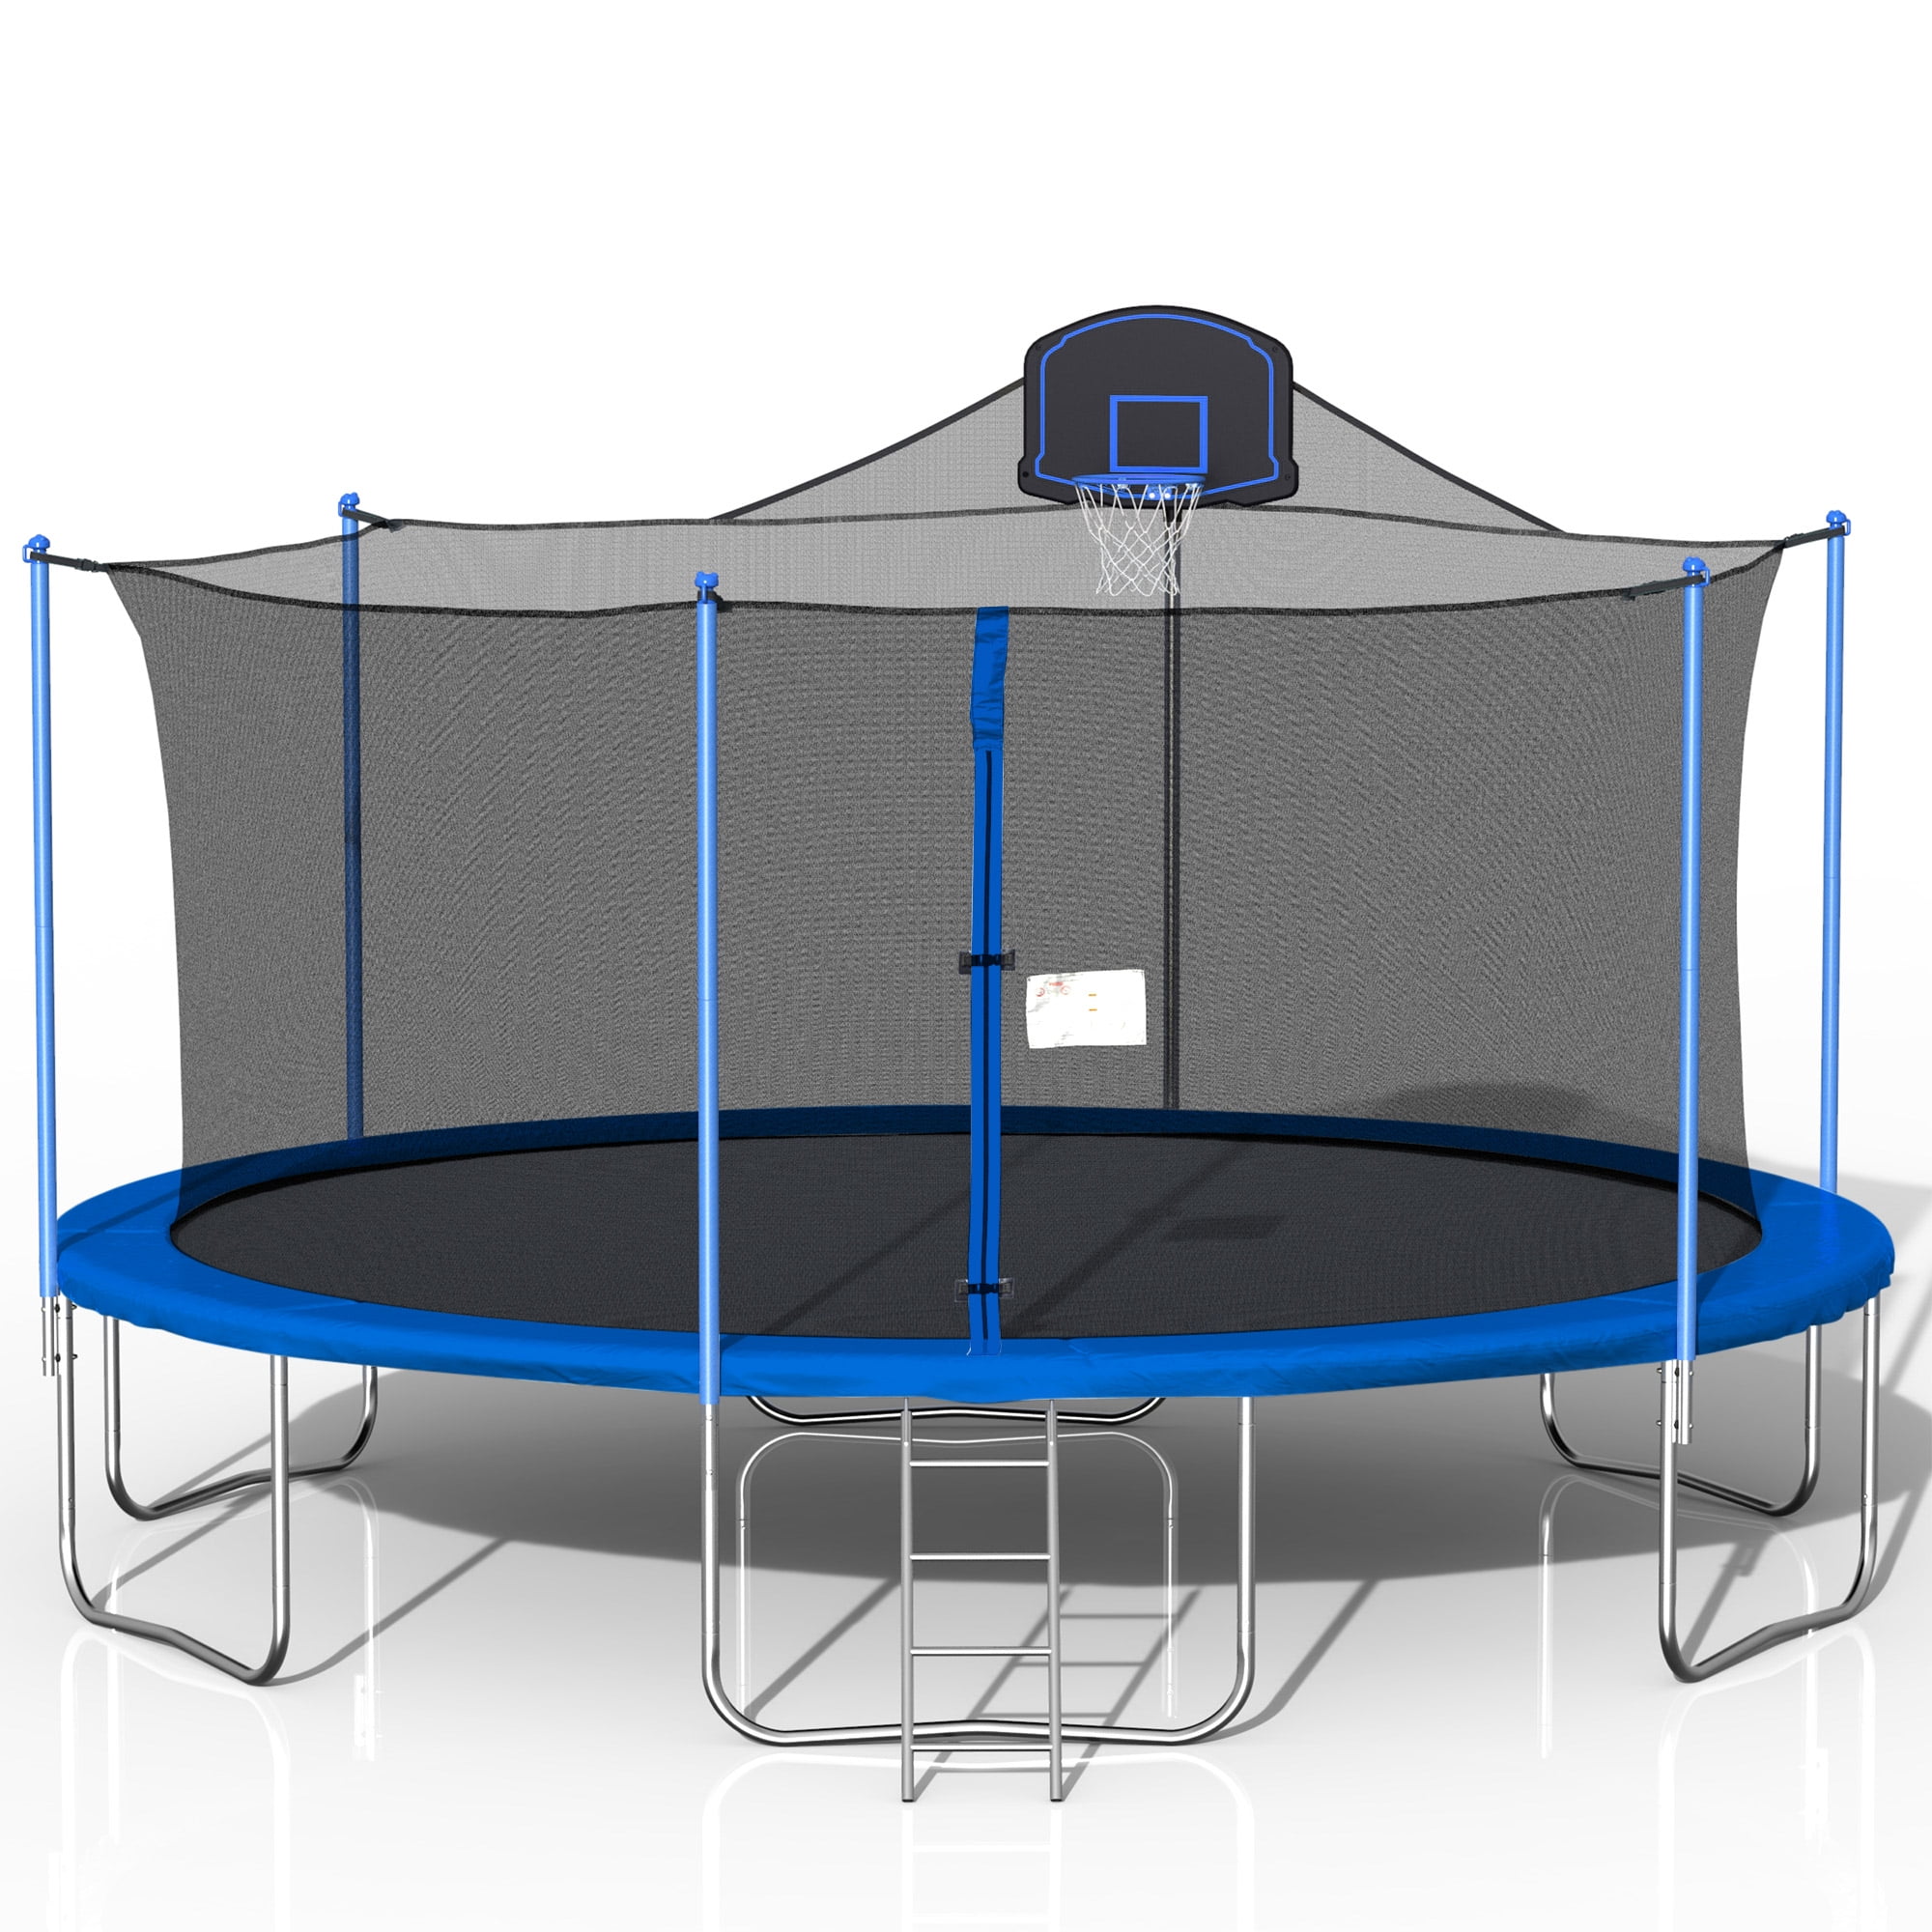 16 FT Outdoor Trampoline with Basketball Hoop, Outdoor Trampoline with Safety Enclosure Net, Circular Trampolines for Adults/Kids, Family Jumping and Ladder, Kids Basketball Trampoline, Q11386